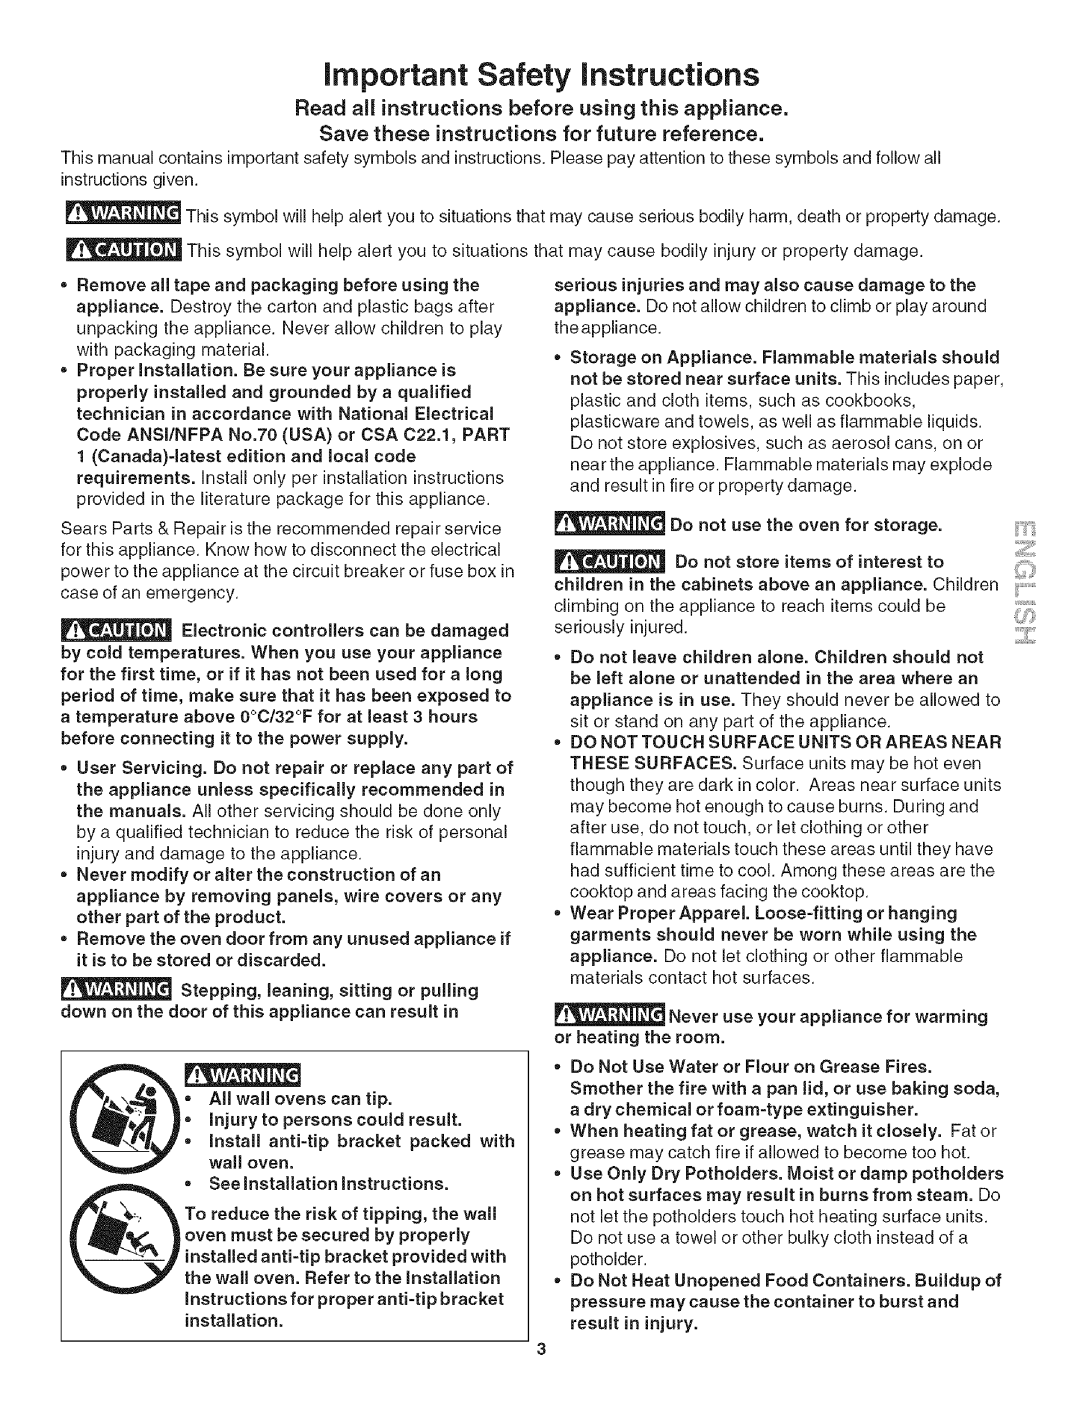 Kenmore 790.4906 manual important Safety instructions, Read all instructions before using this appliance 